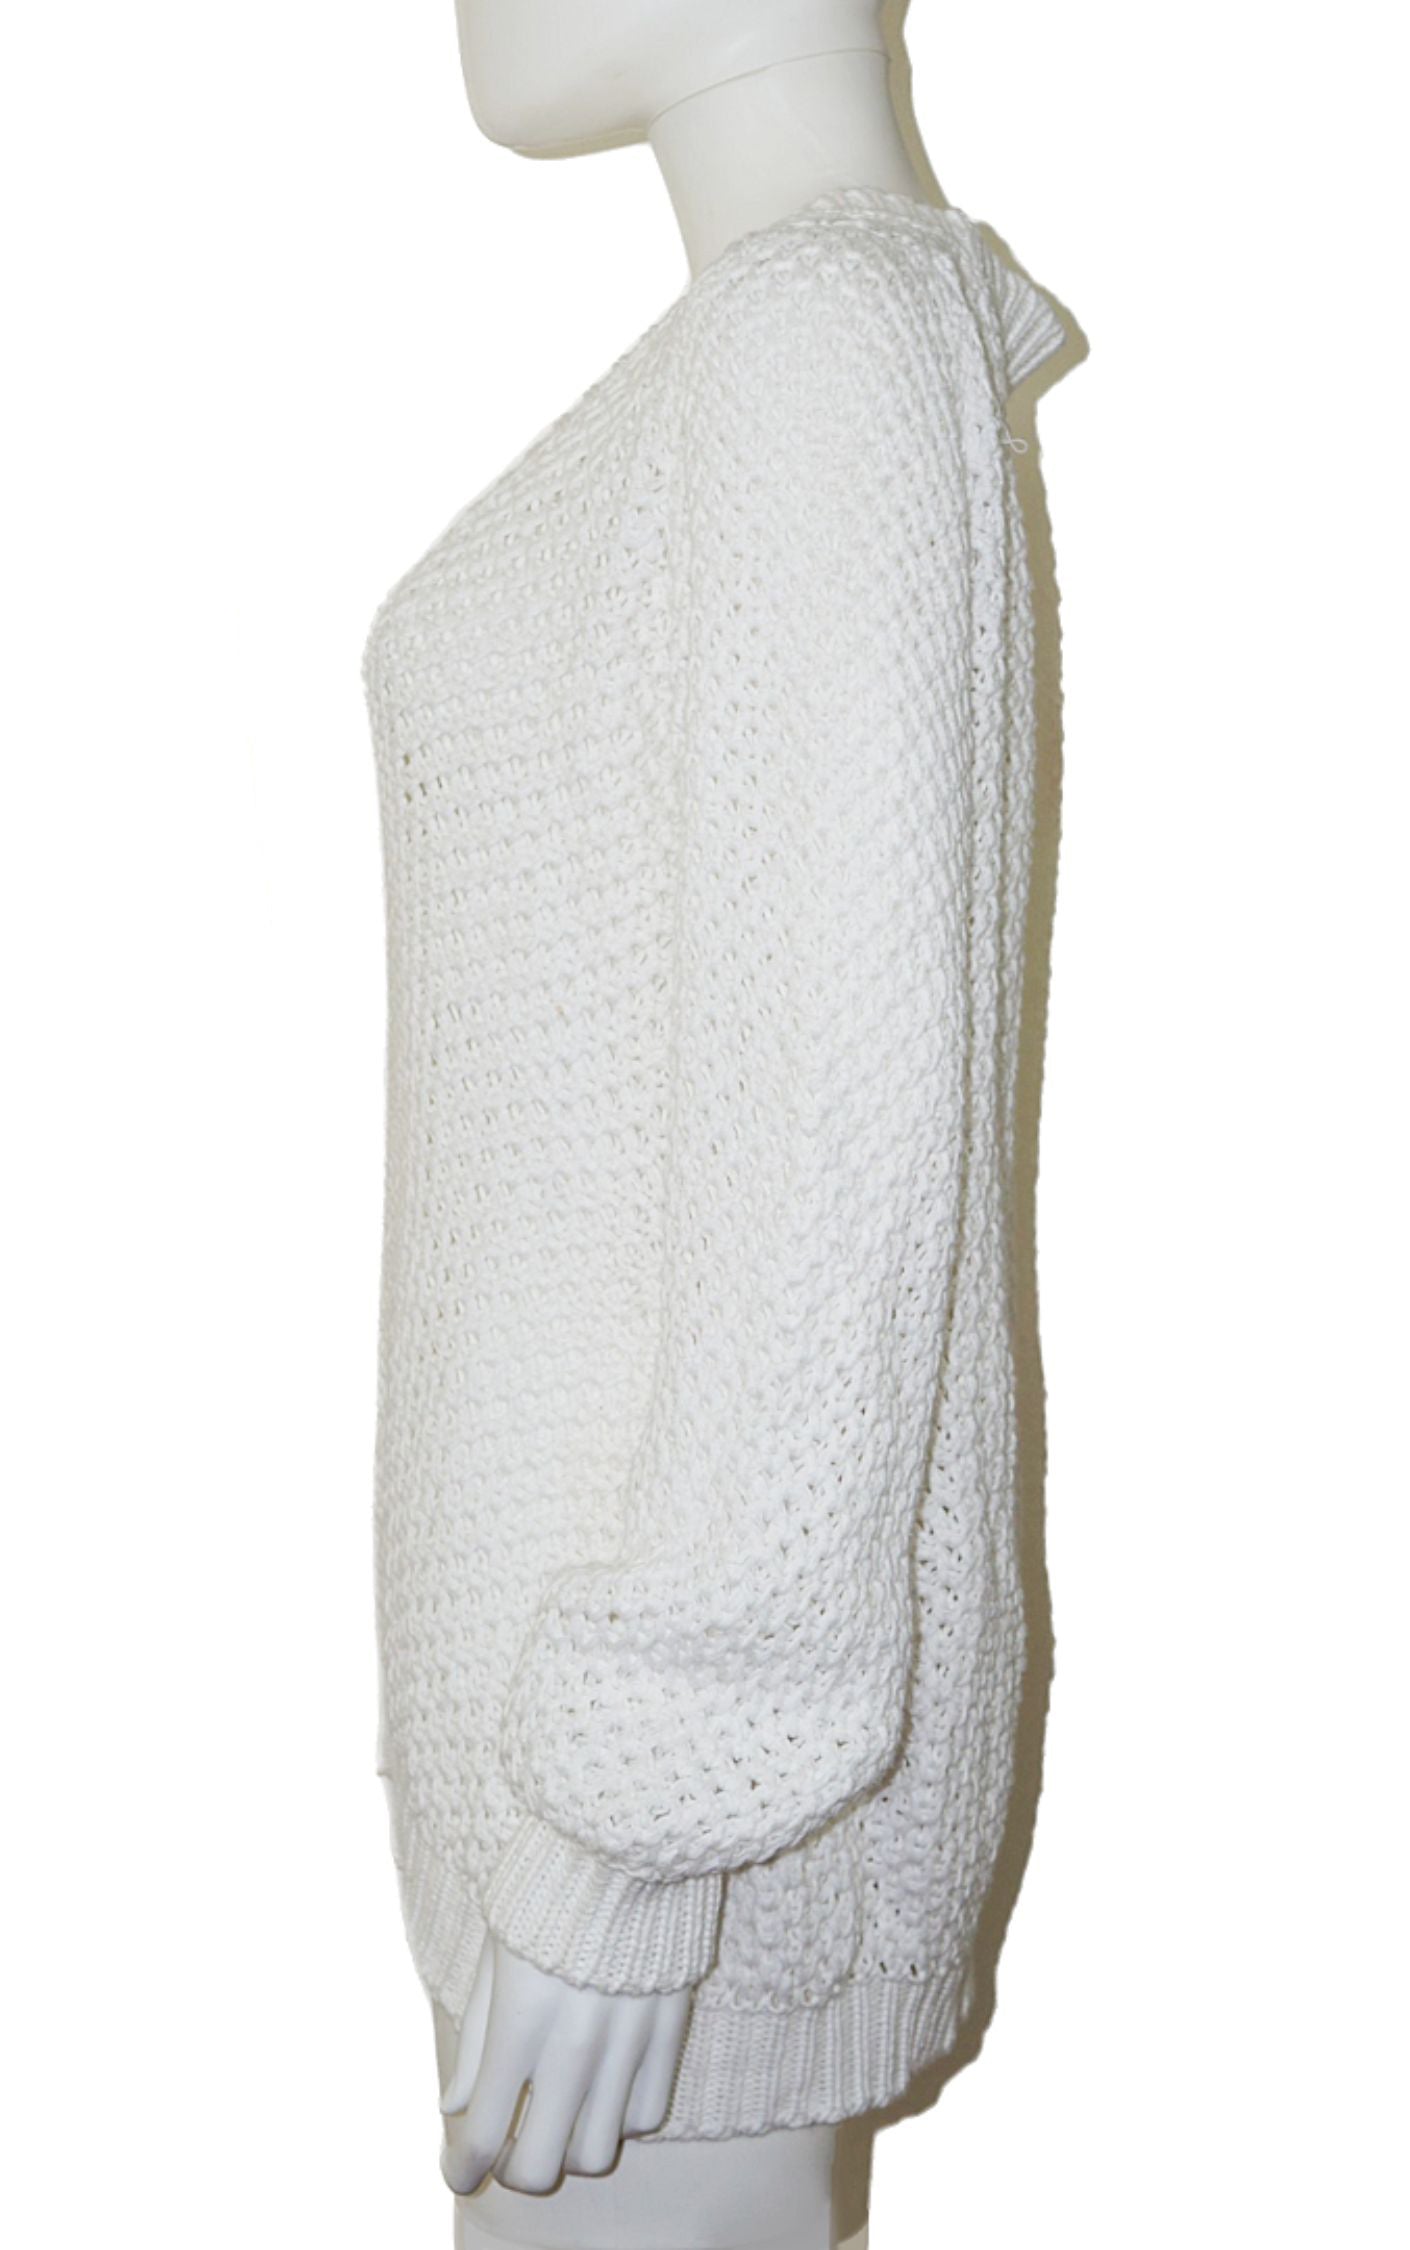 BURBERRY London White V-Neck Knitted Sweater resellum